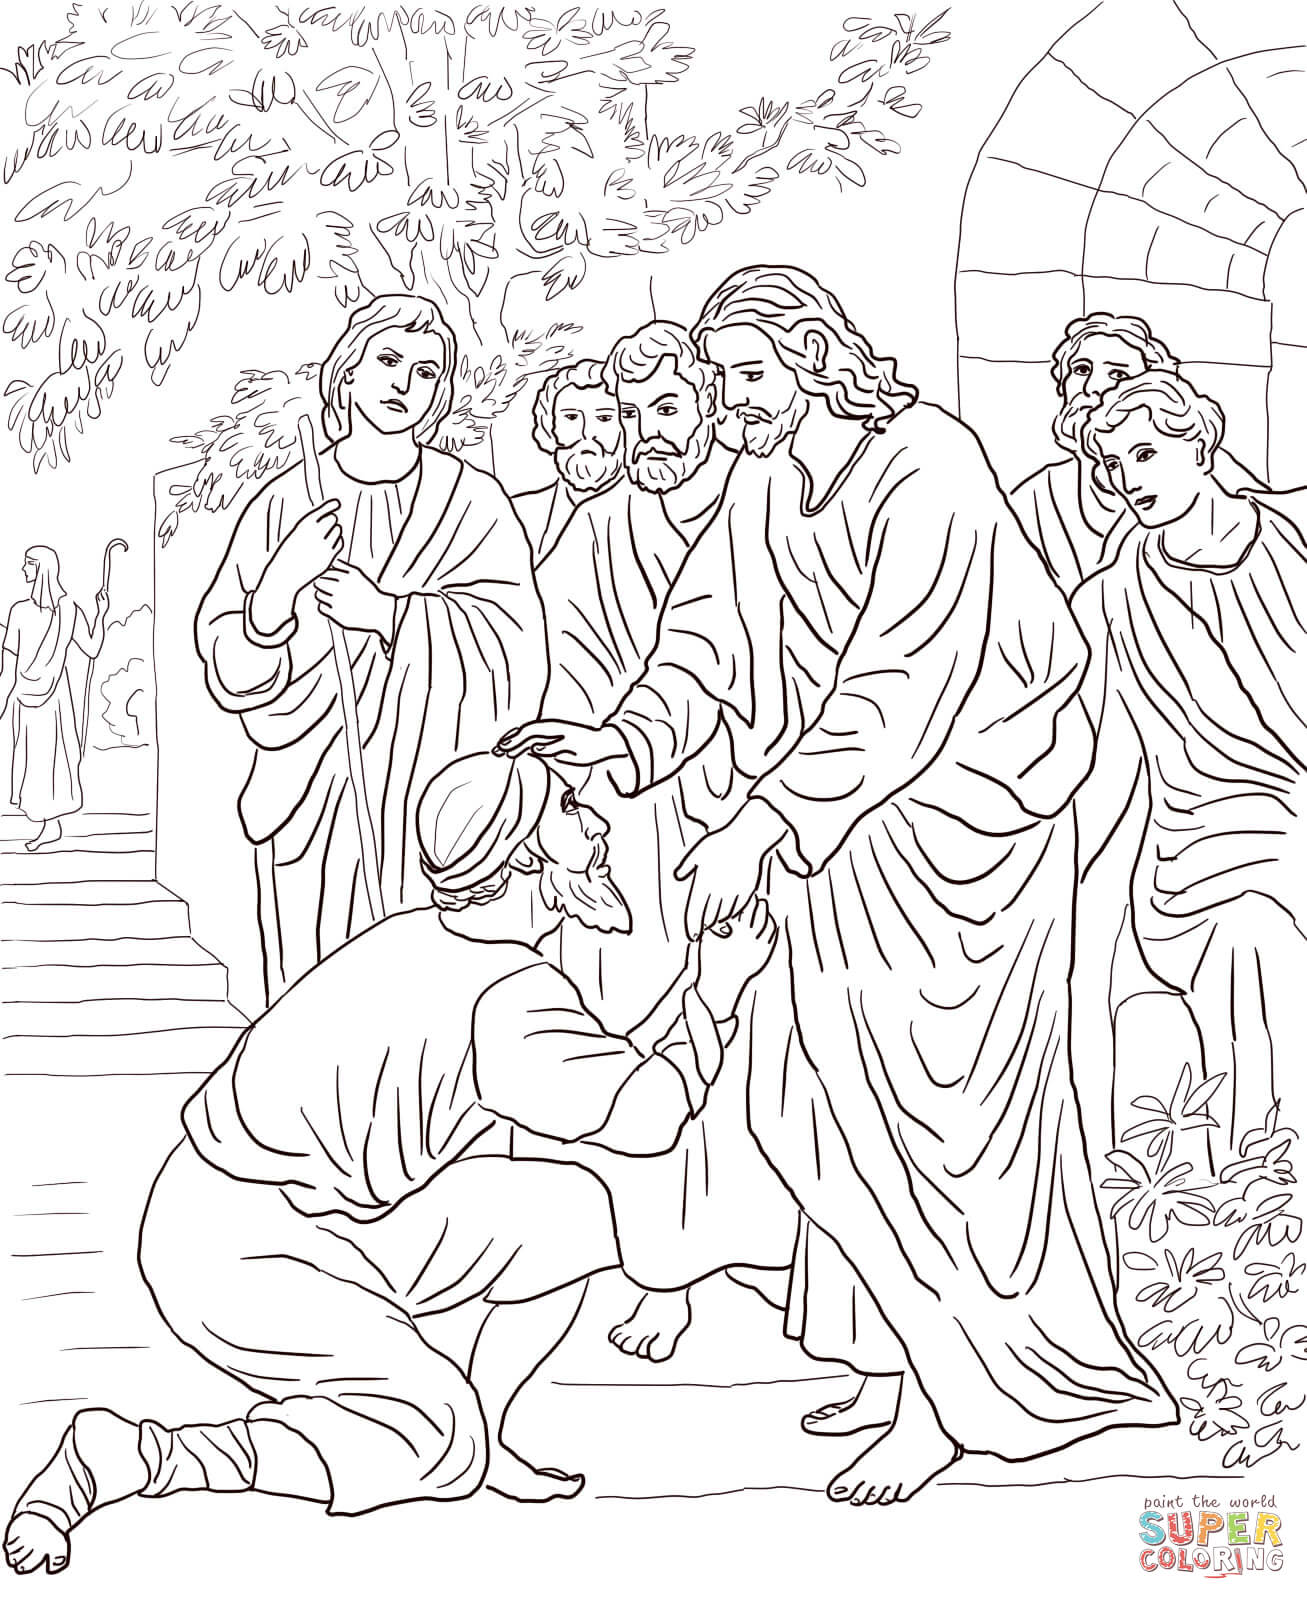 Jesus Heals the Leper coloring page | Free Printable Coloring Pages